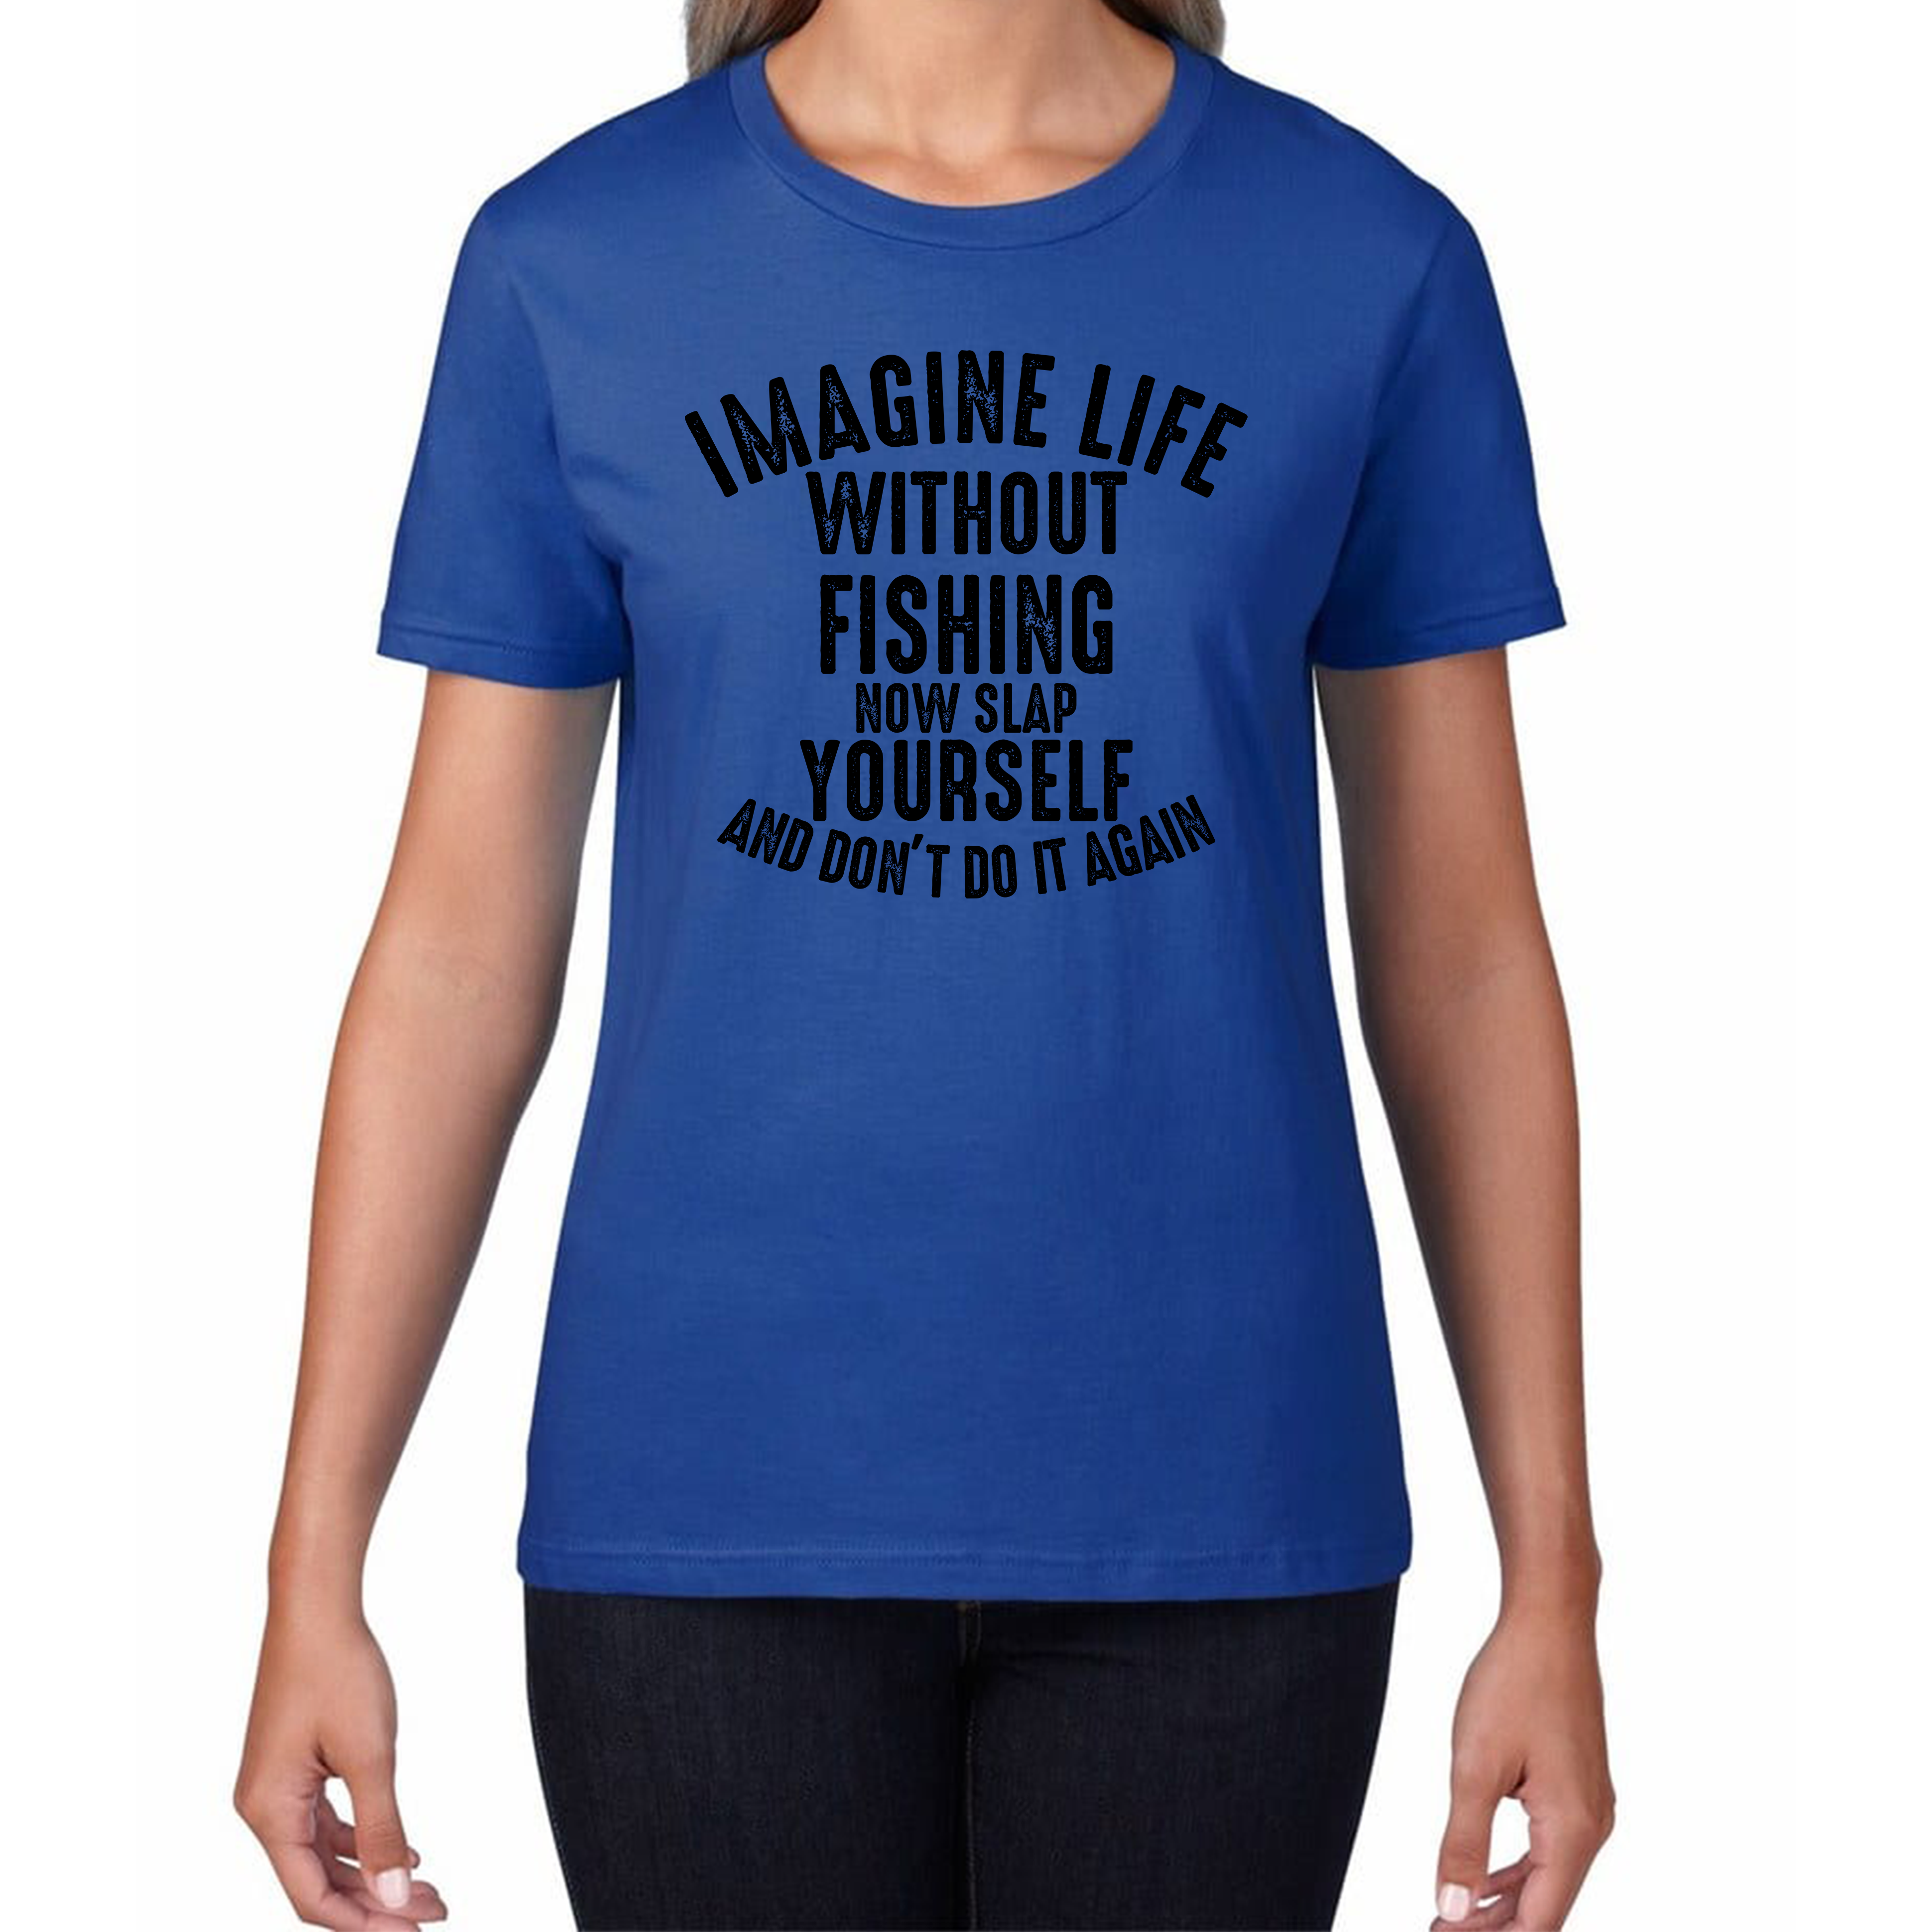 Imagine Life Without Fishing Now Slap Yourself And Don't Do It Again T-Shirt Fisherman Fishing Adventure Hobby Funny Womens Tee Top